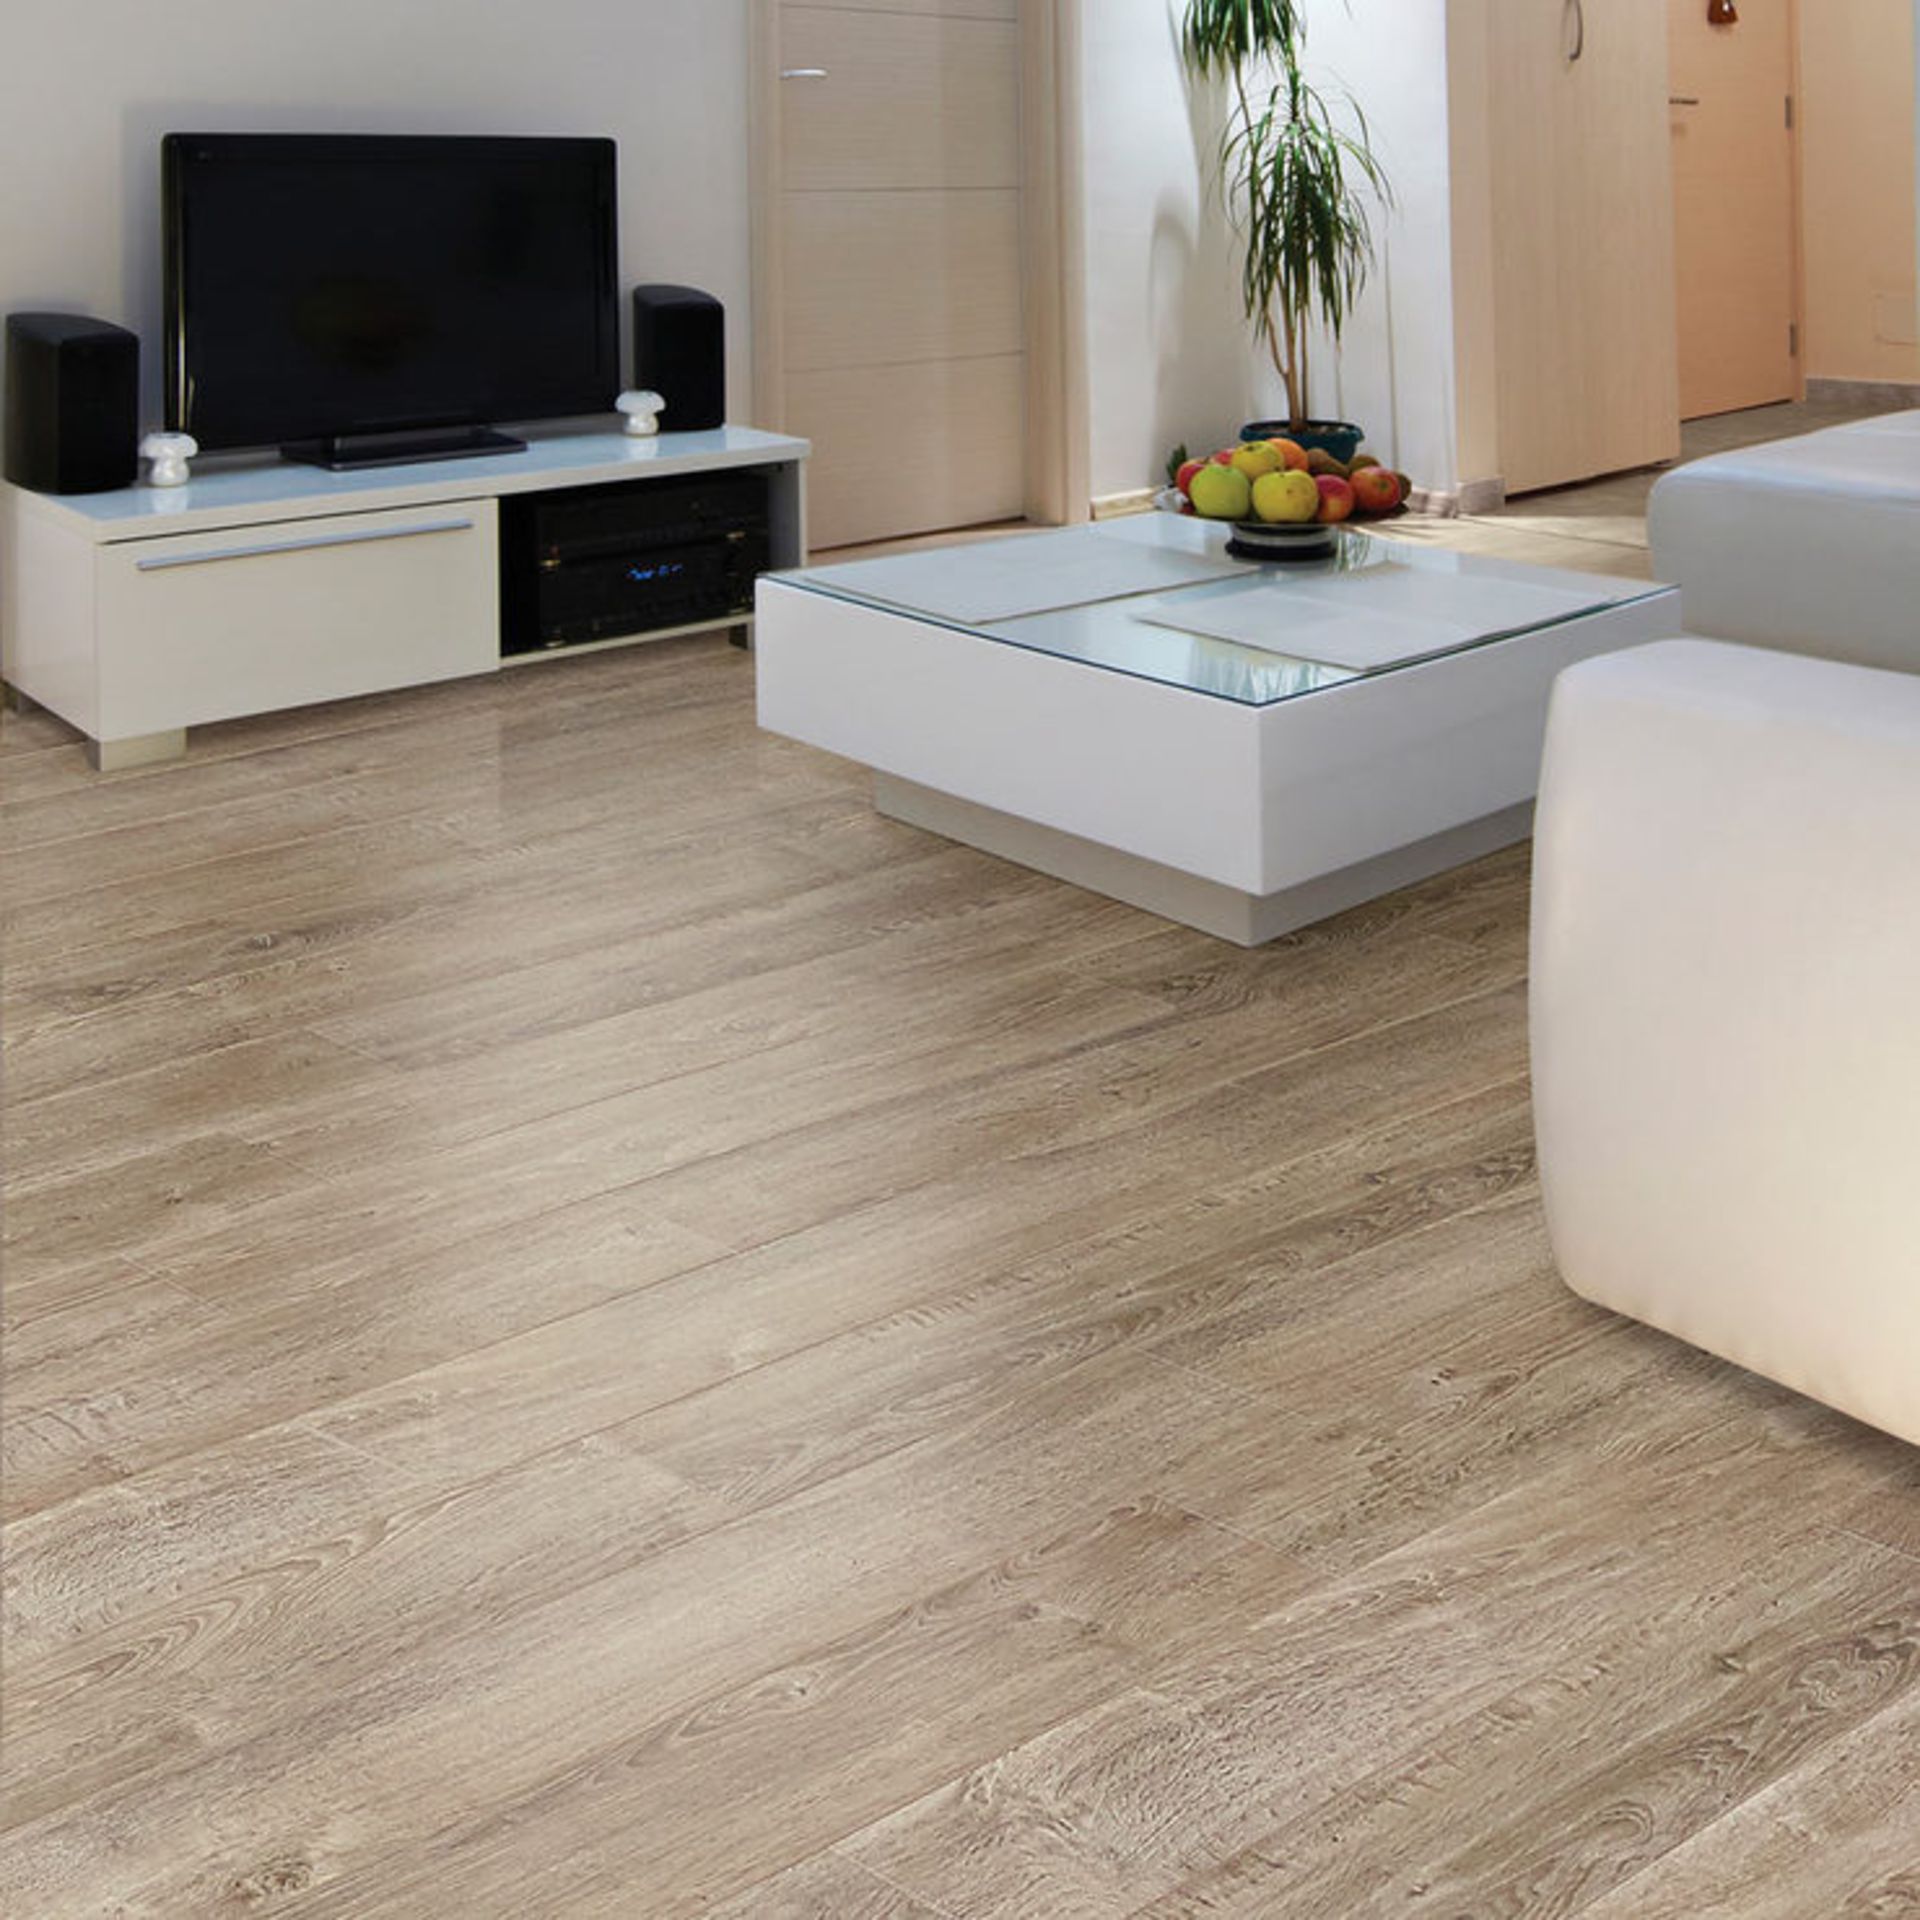 1 GOLDEN SELECT LAMINATE FLOORING IN PROVIDENCE GREY (COVERS APPROXIMATELY 1.162m2 PER BOX) RRP Â£